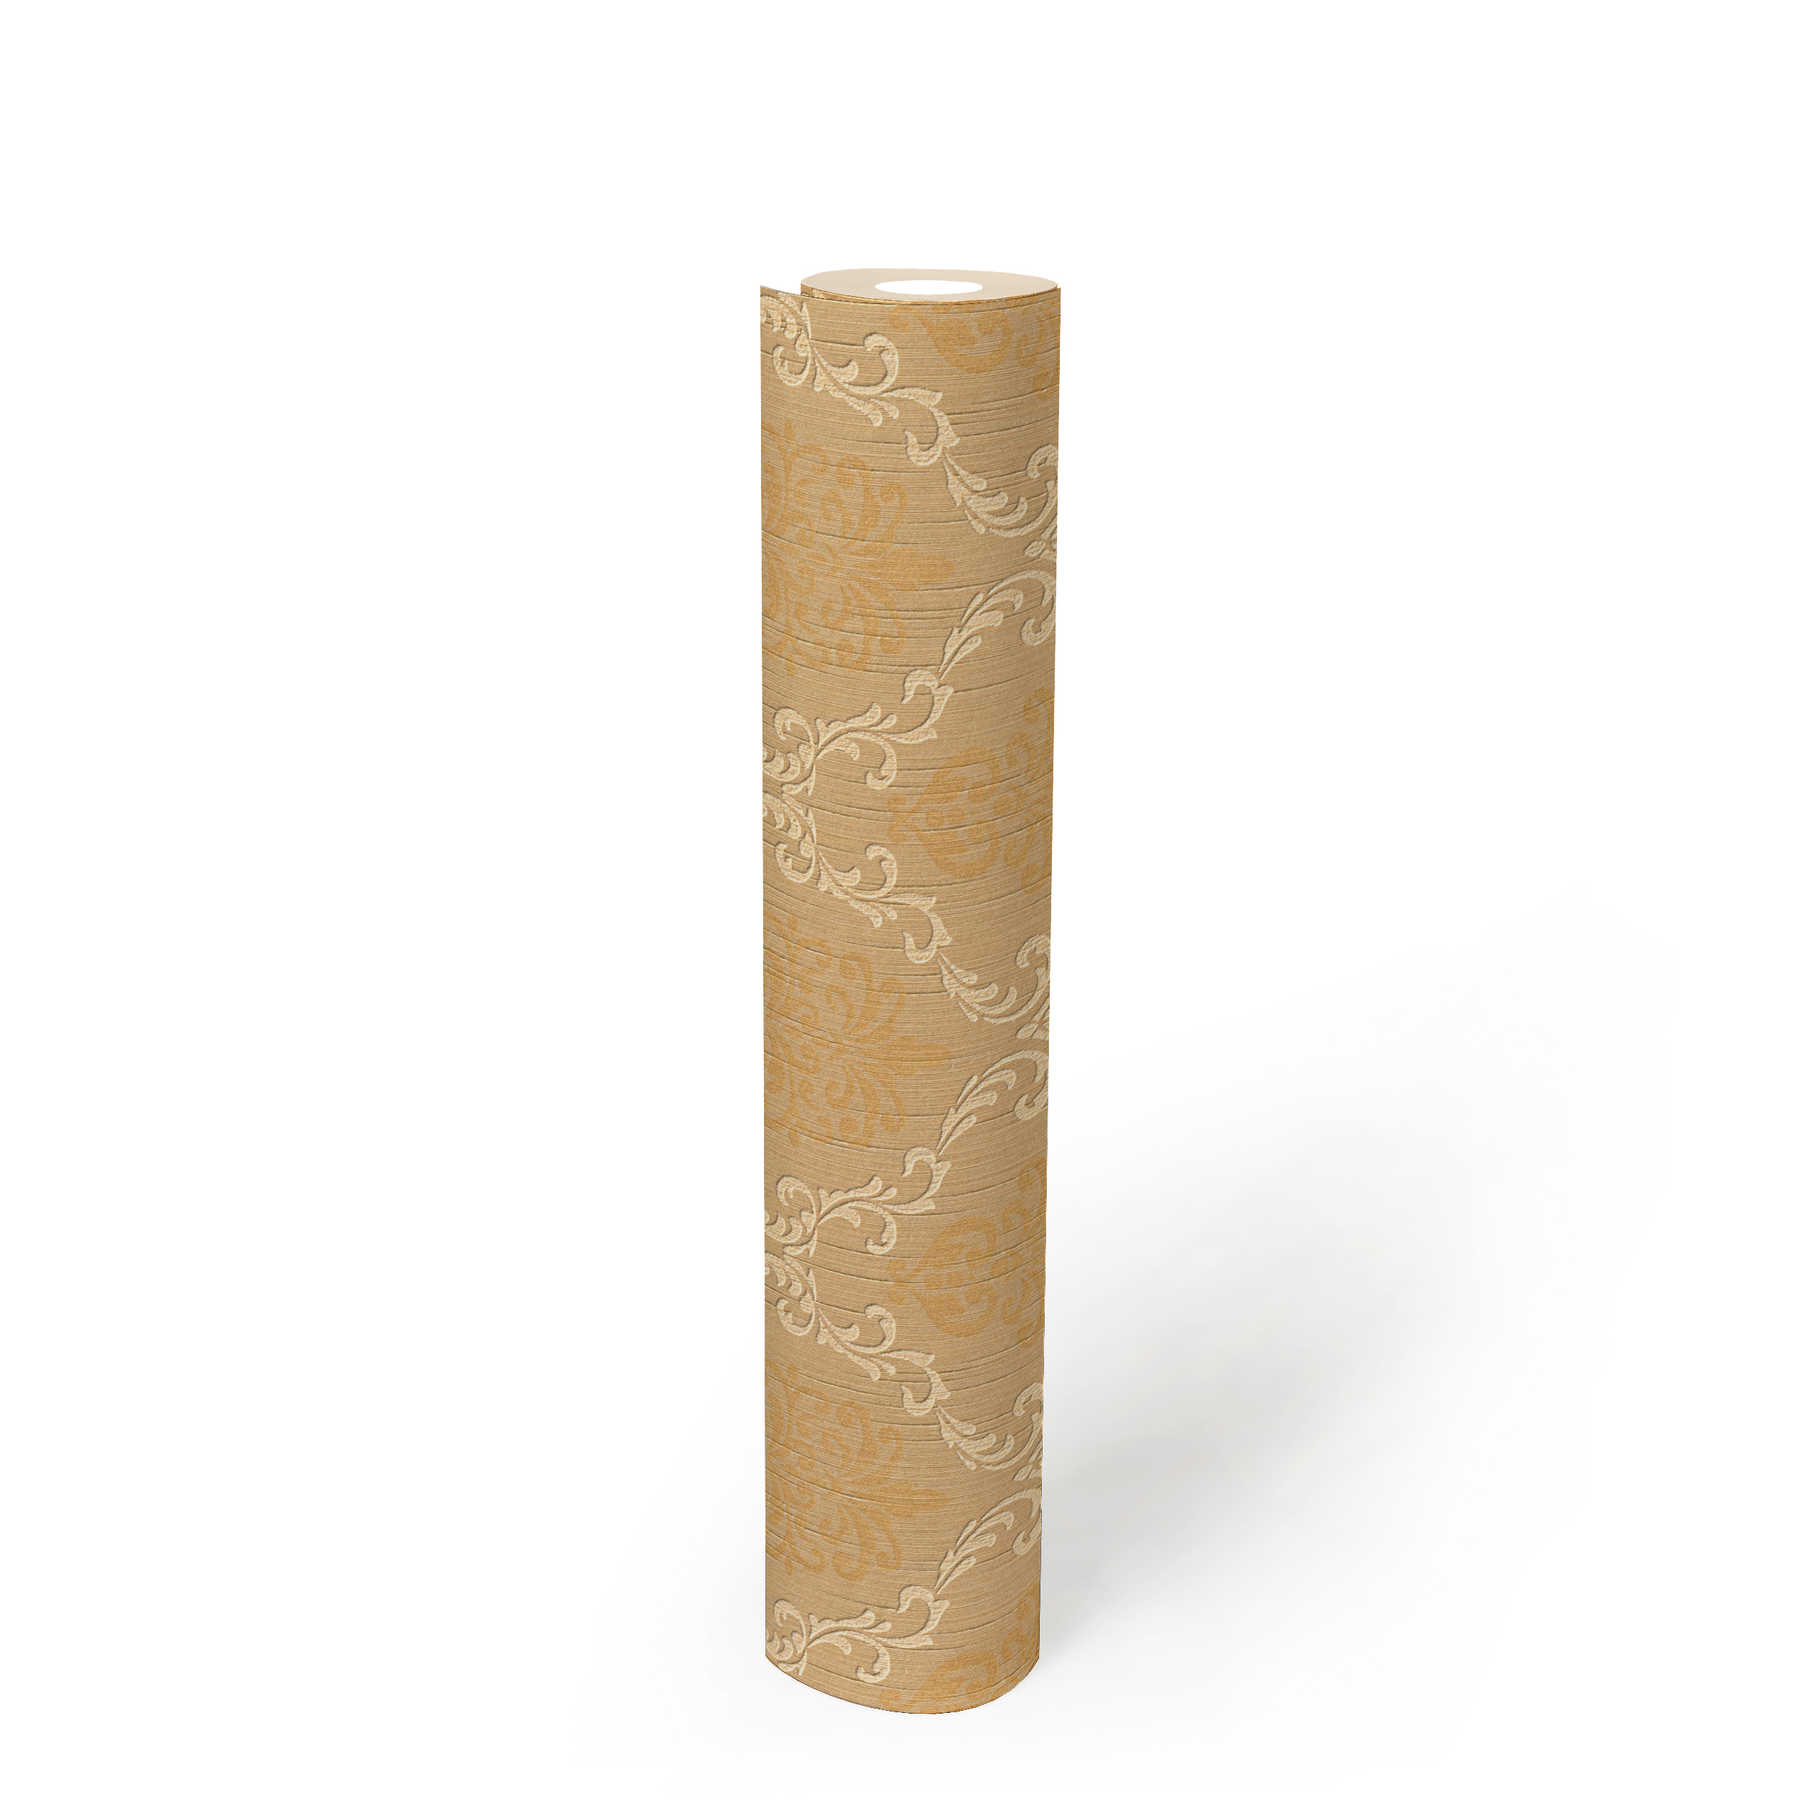             Non-woven wallpaper with textile design & ornaments with texture effect - beige
        